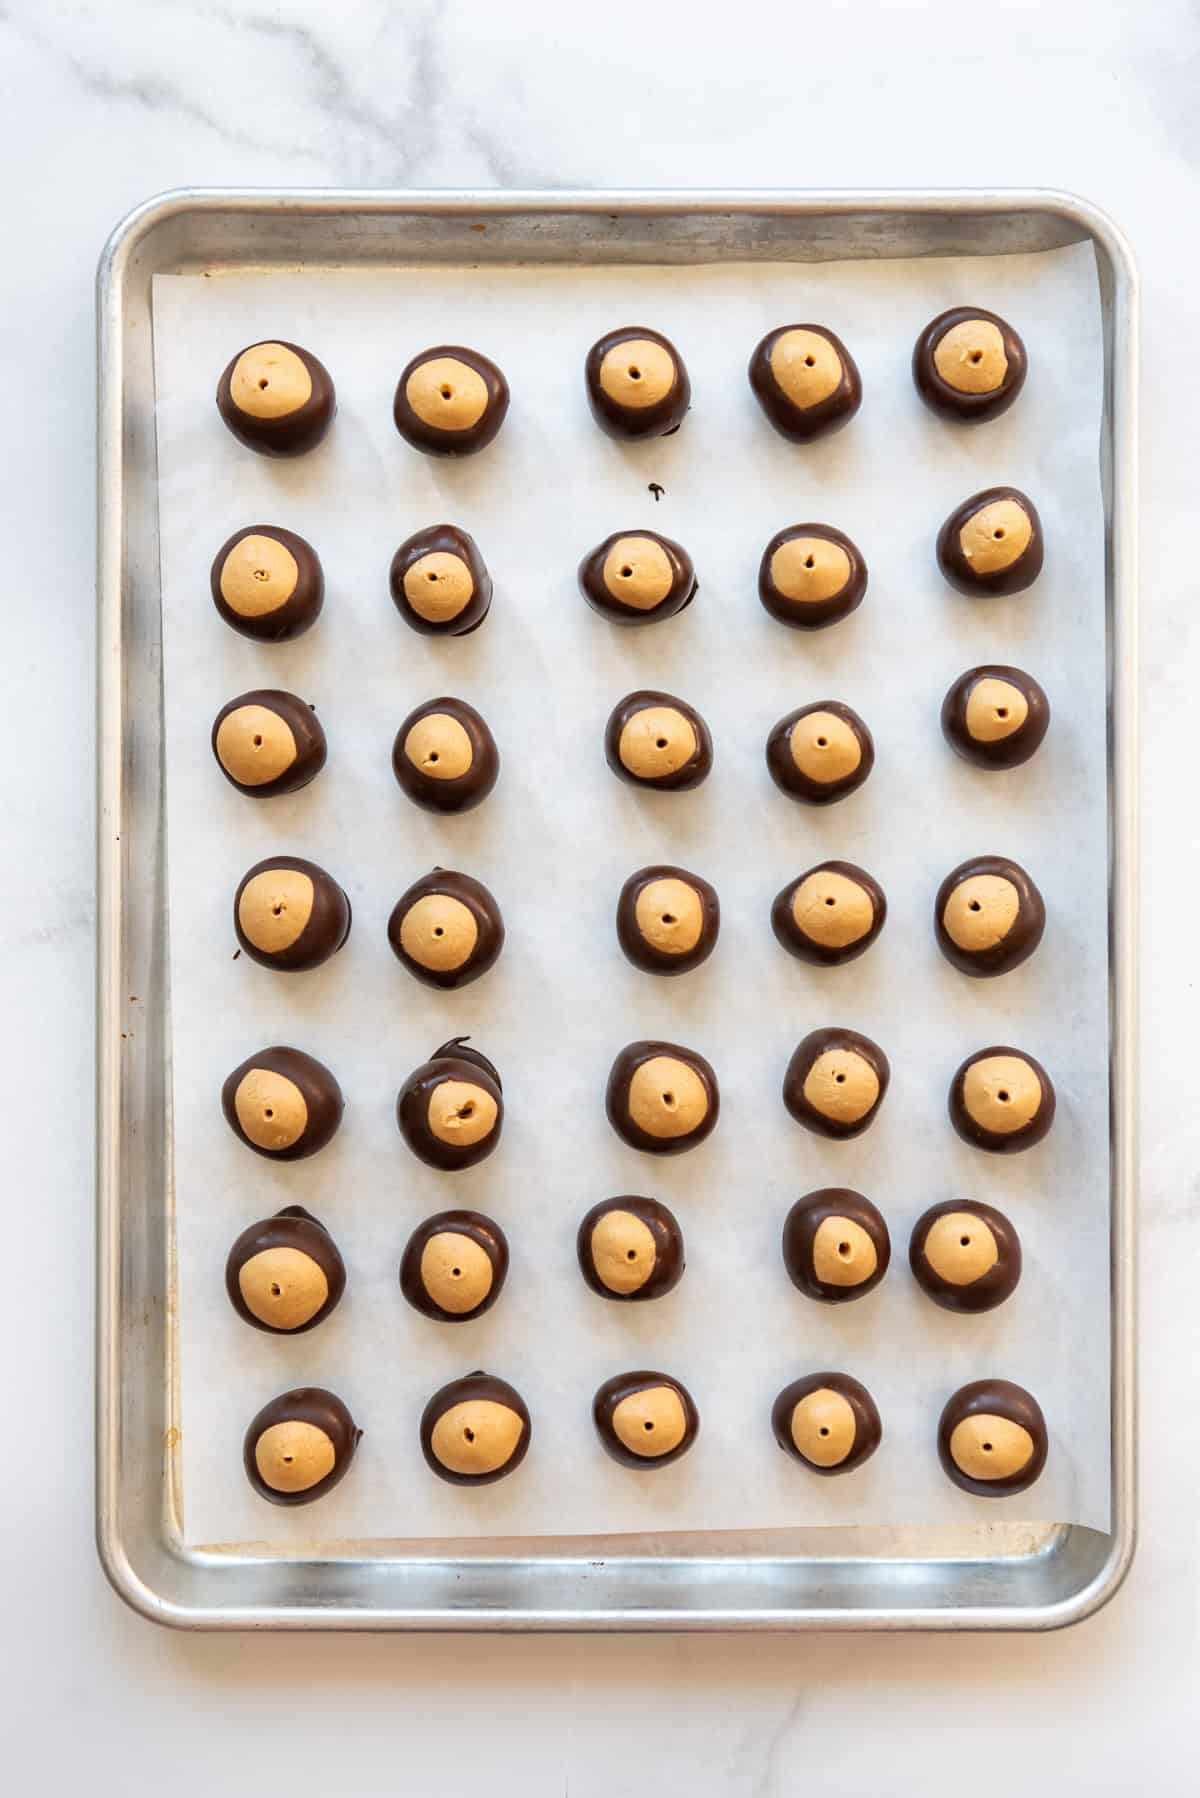 Holes in the top of each buckeye from piercing them with a toothpick to dip them in chocolate.